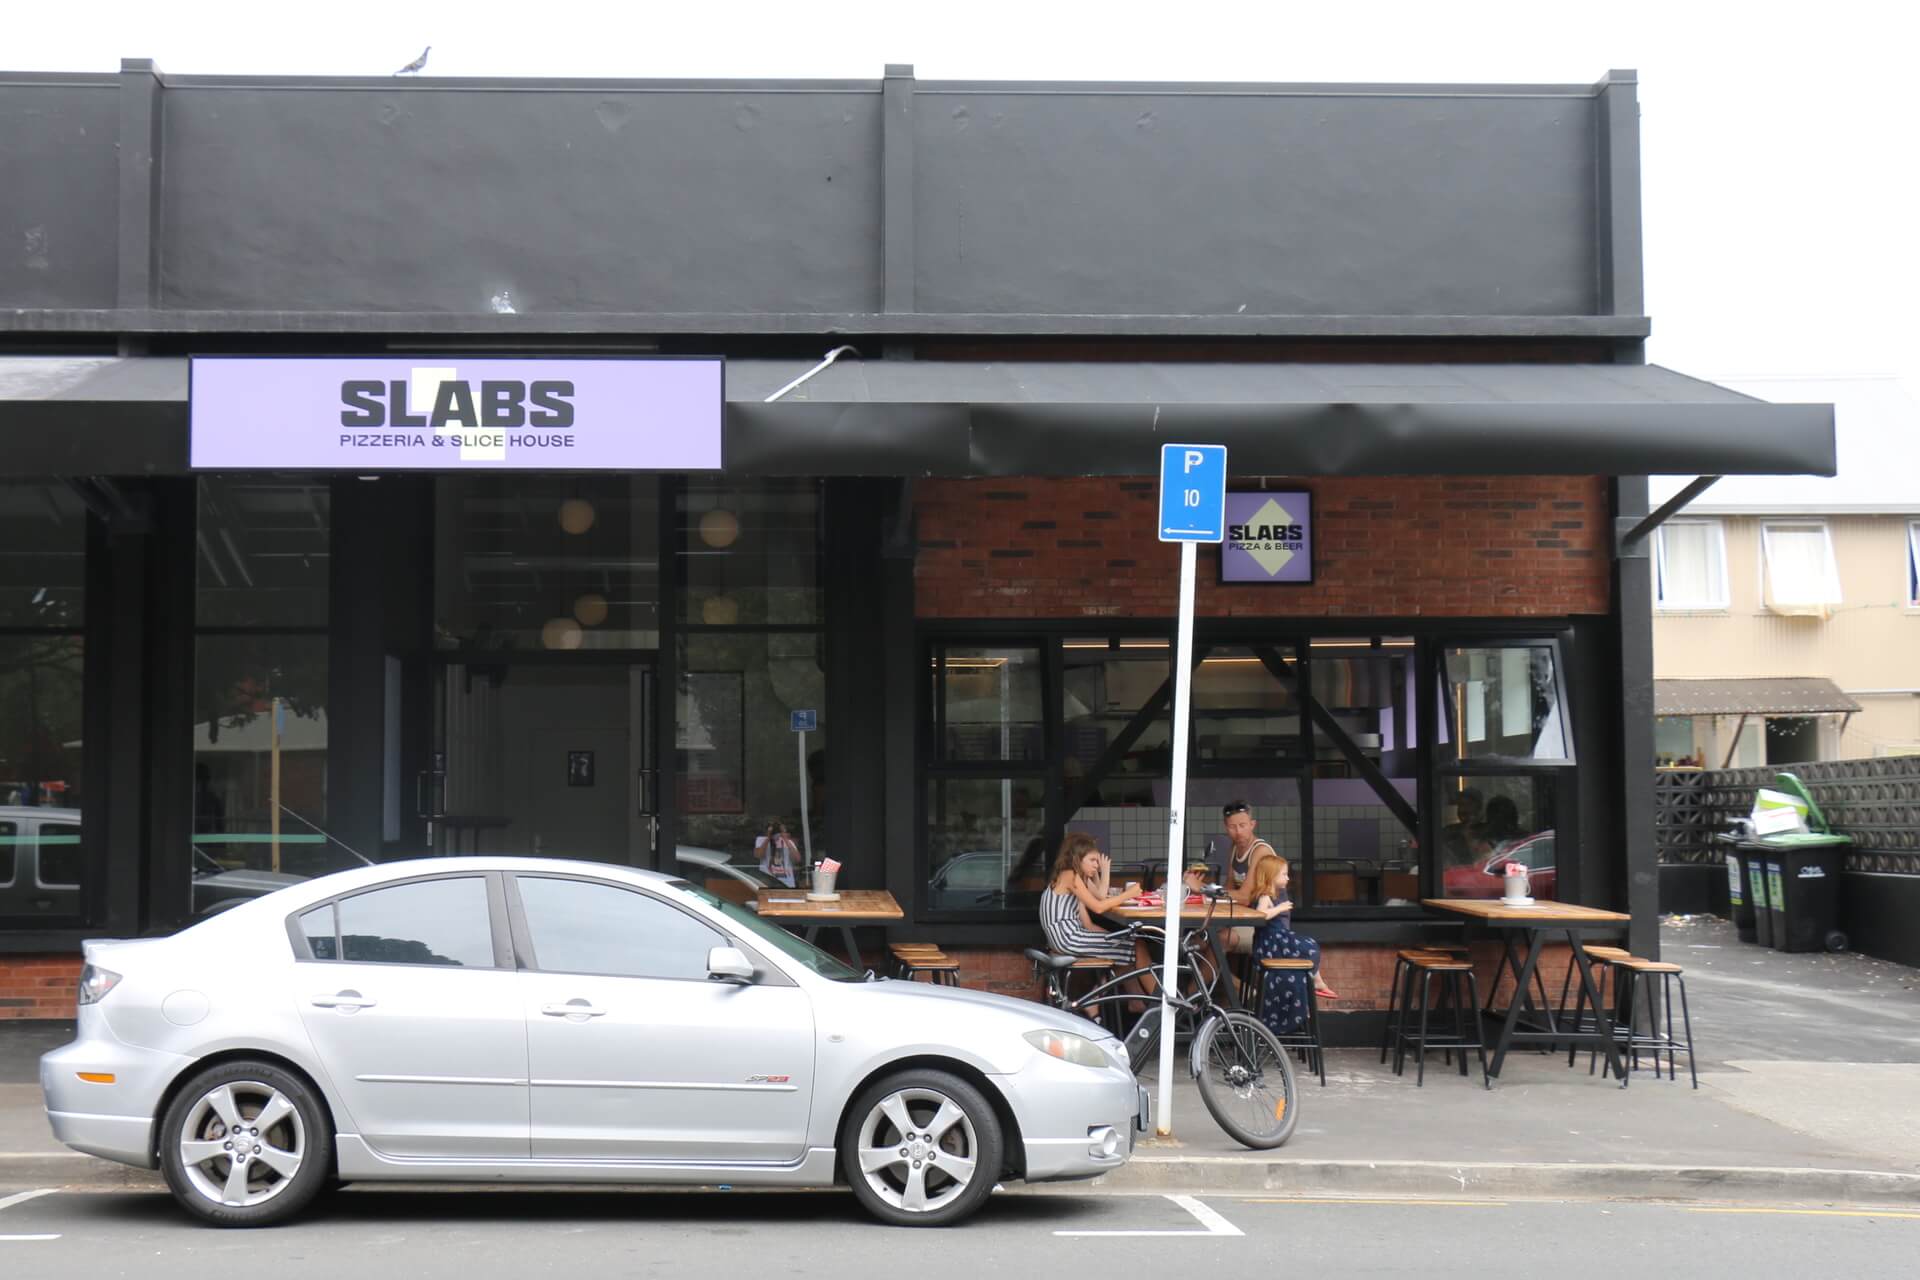 Slabs is a neighbourhood pizza spot serving up square Detroit-style pies